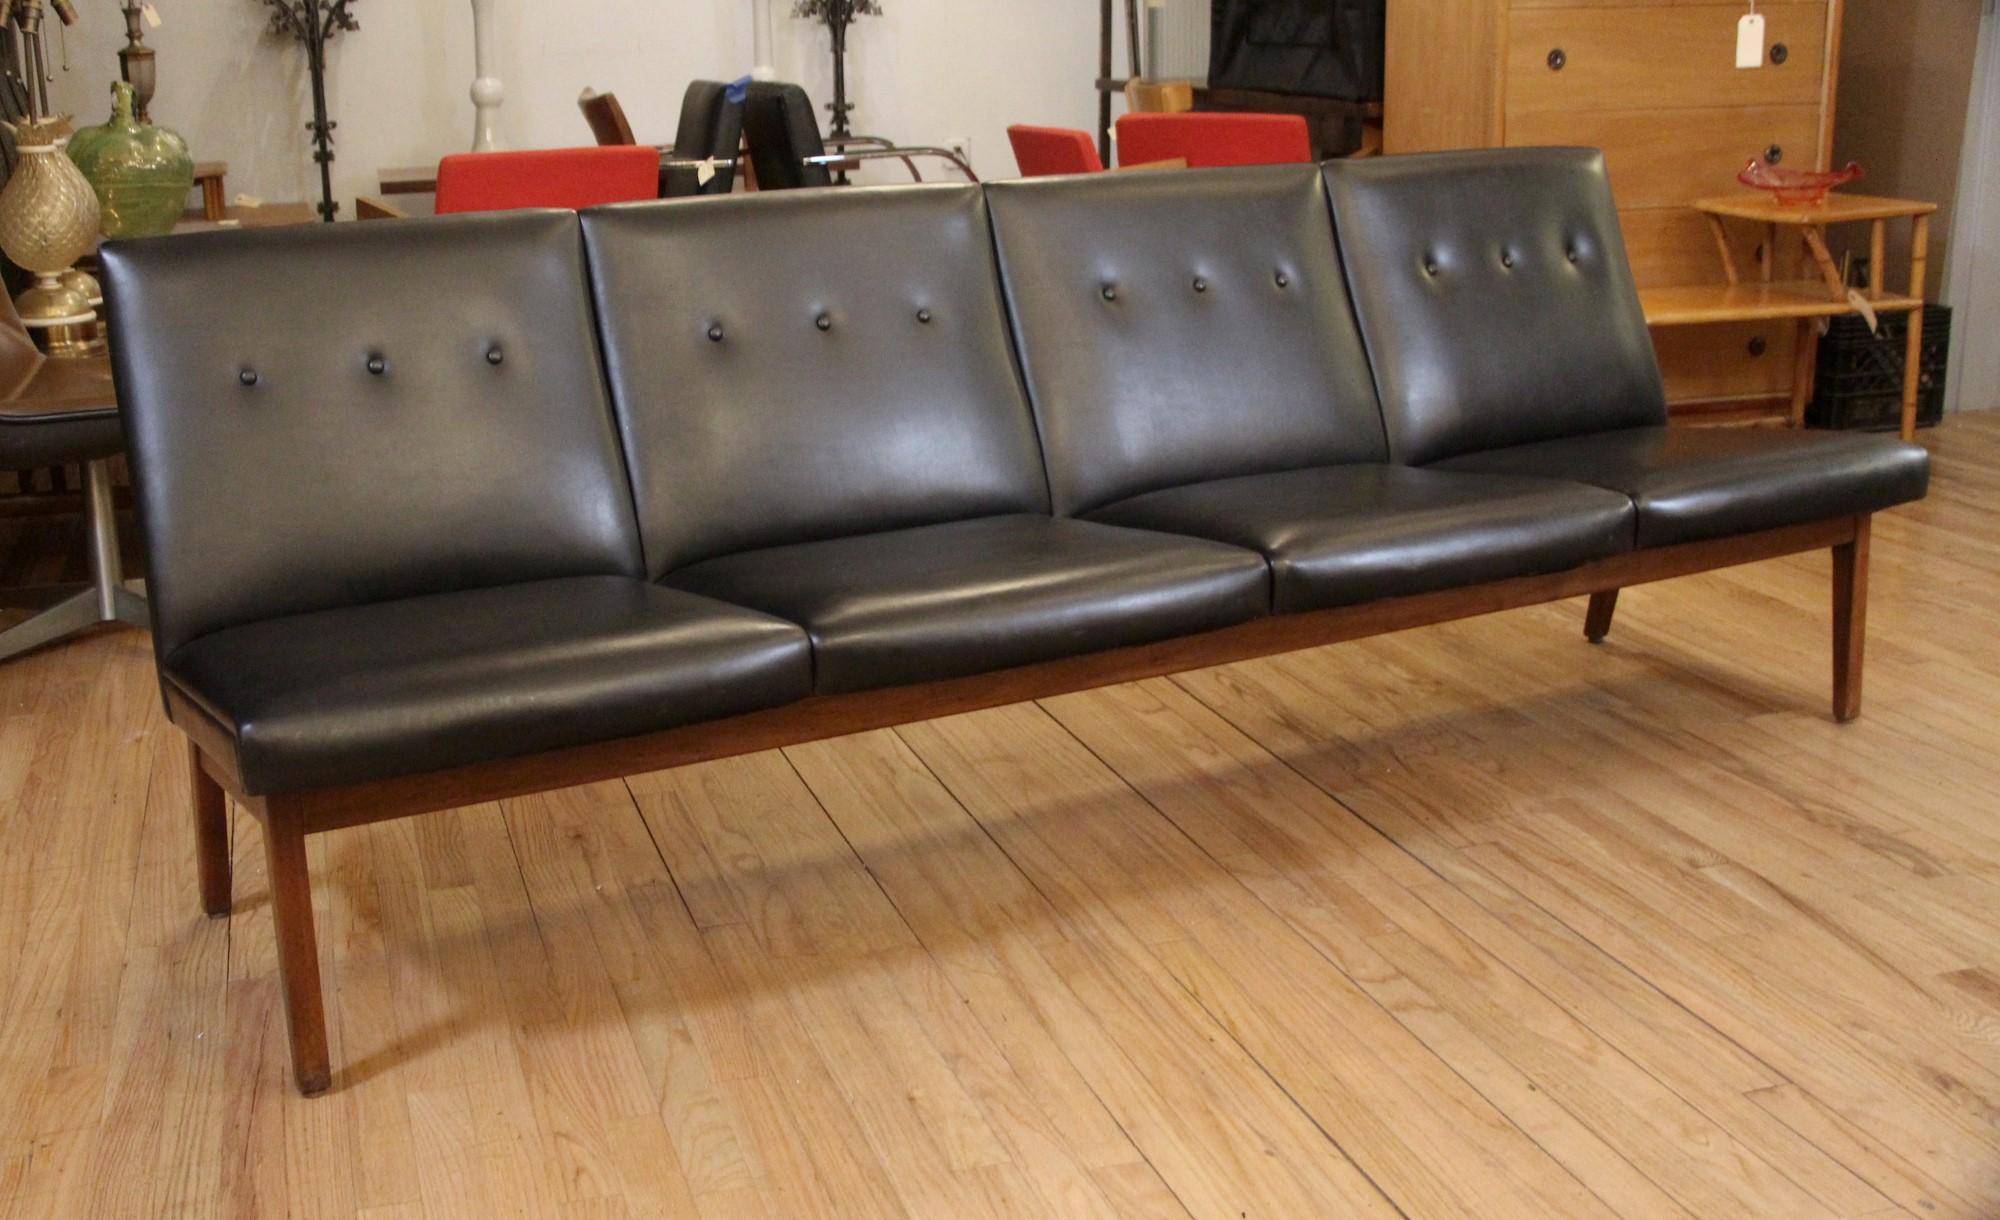 1970s Mid-Century Modern sofa or lounge with three buttons per section and wood legs. This can be seen at our 333 West 52nd St location in the Theater District West of Manhattan.